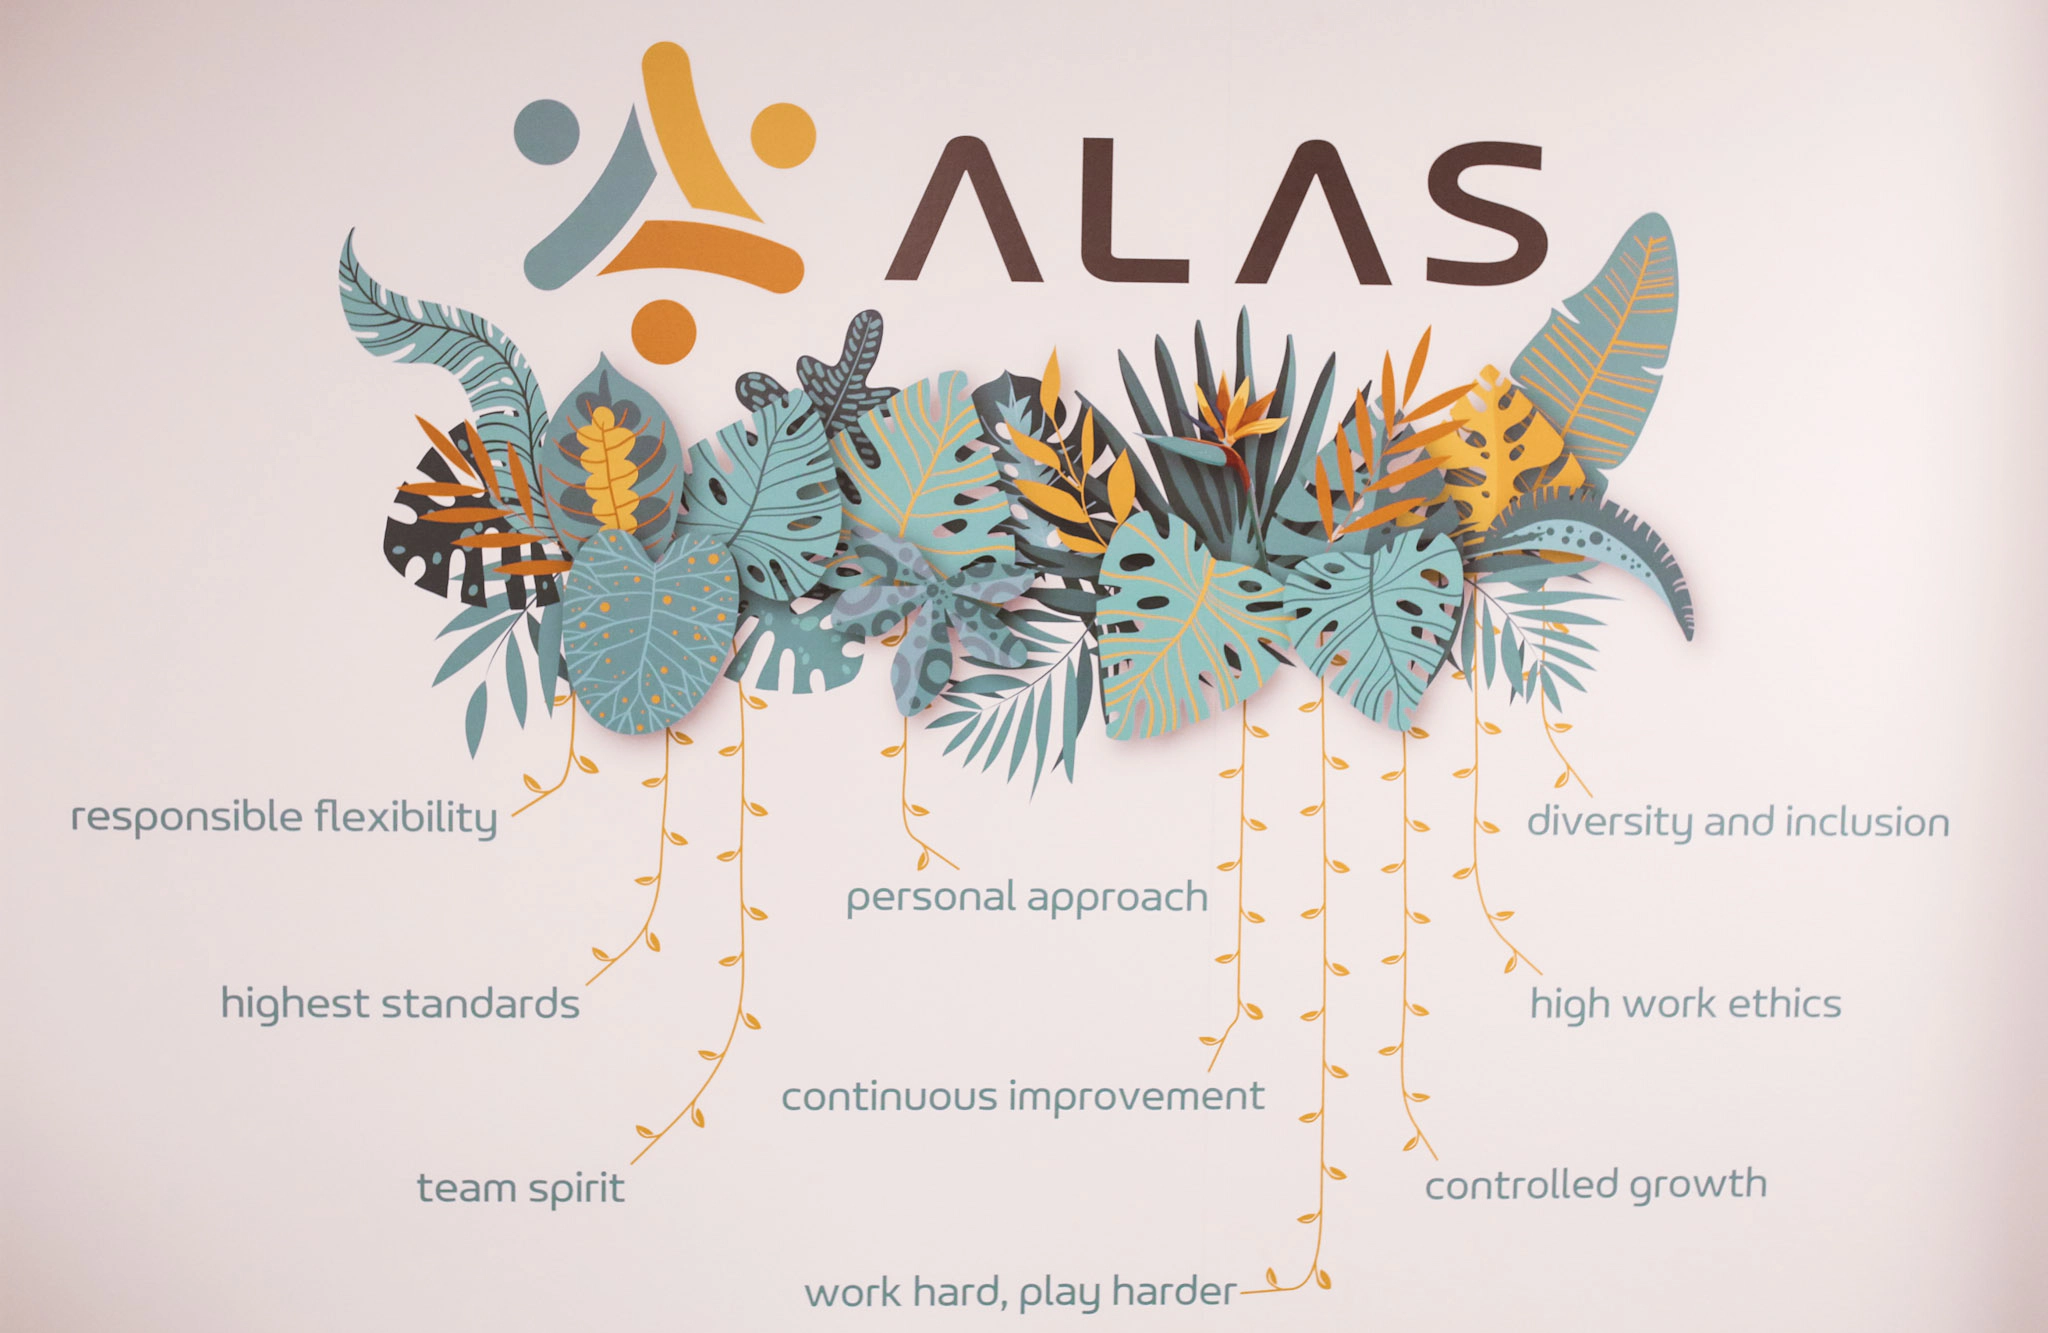 Wall mural of Alas new logo and company values: responsible flexibility, highest standards, team spirit, personal approach, continuous improvement, diversity and inclusion, high work ethics, controlled growth, work hard - play harder.